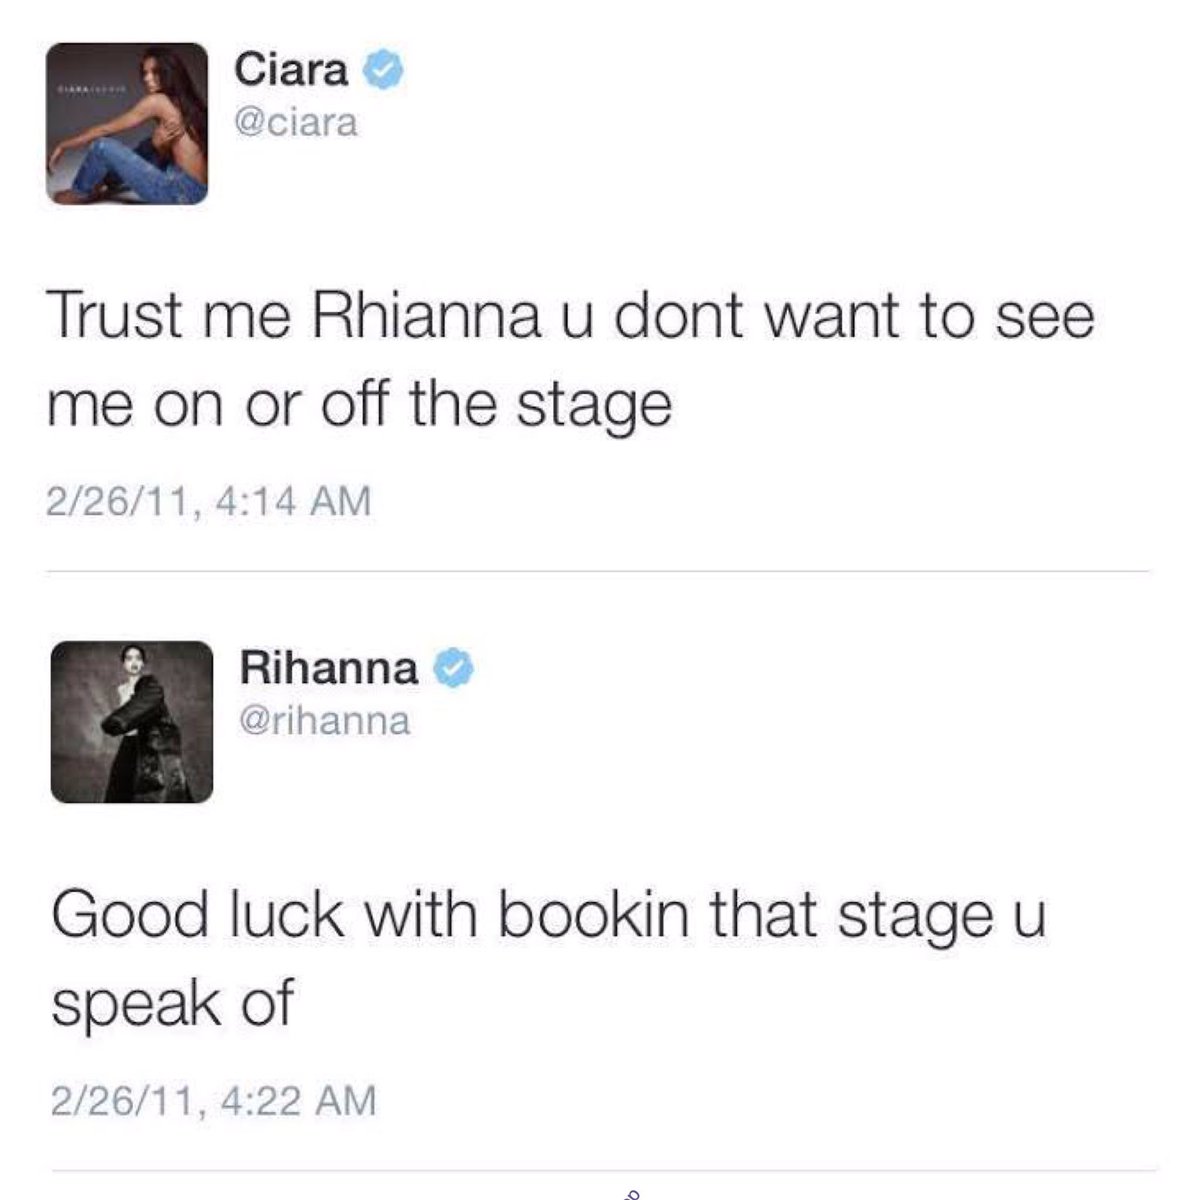 Best Tweets of All Time - Ciara Trust me Rhianna u dont want to see me on or off the stage 22611, Rihanna Good luck with bookin that stage u speak of 22611, P